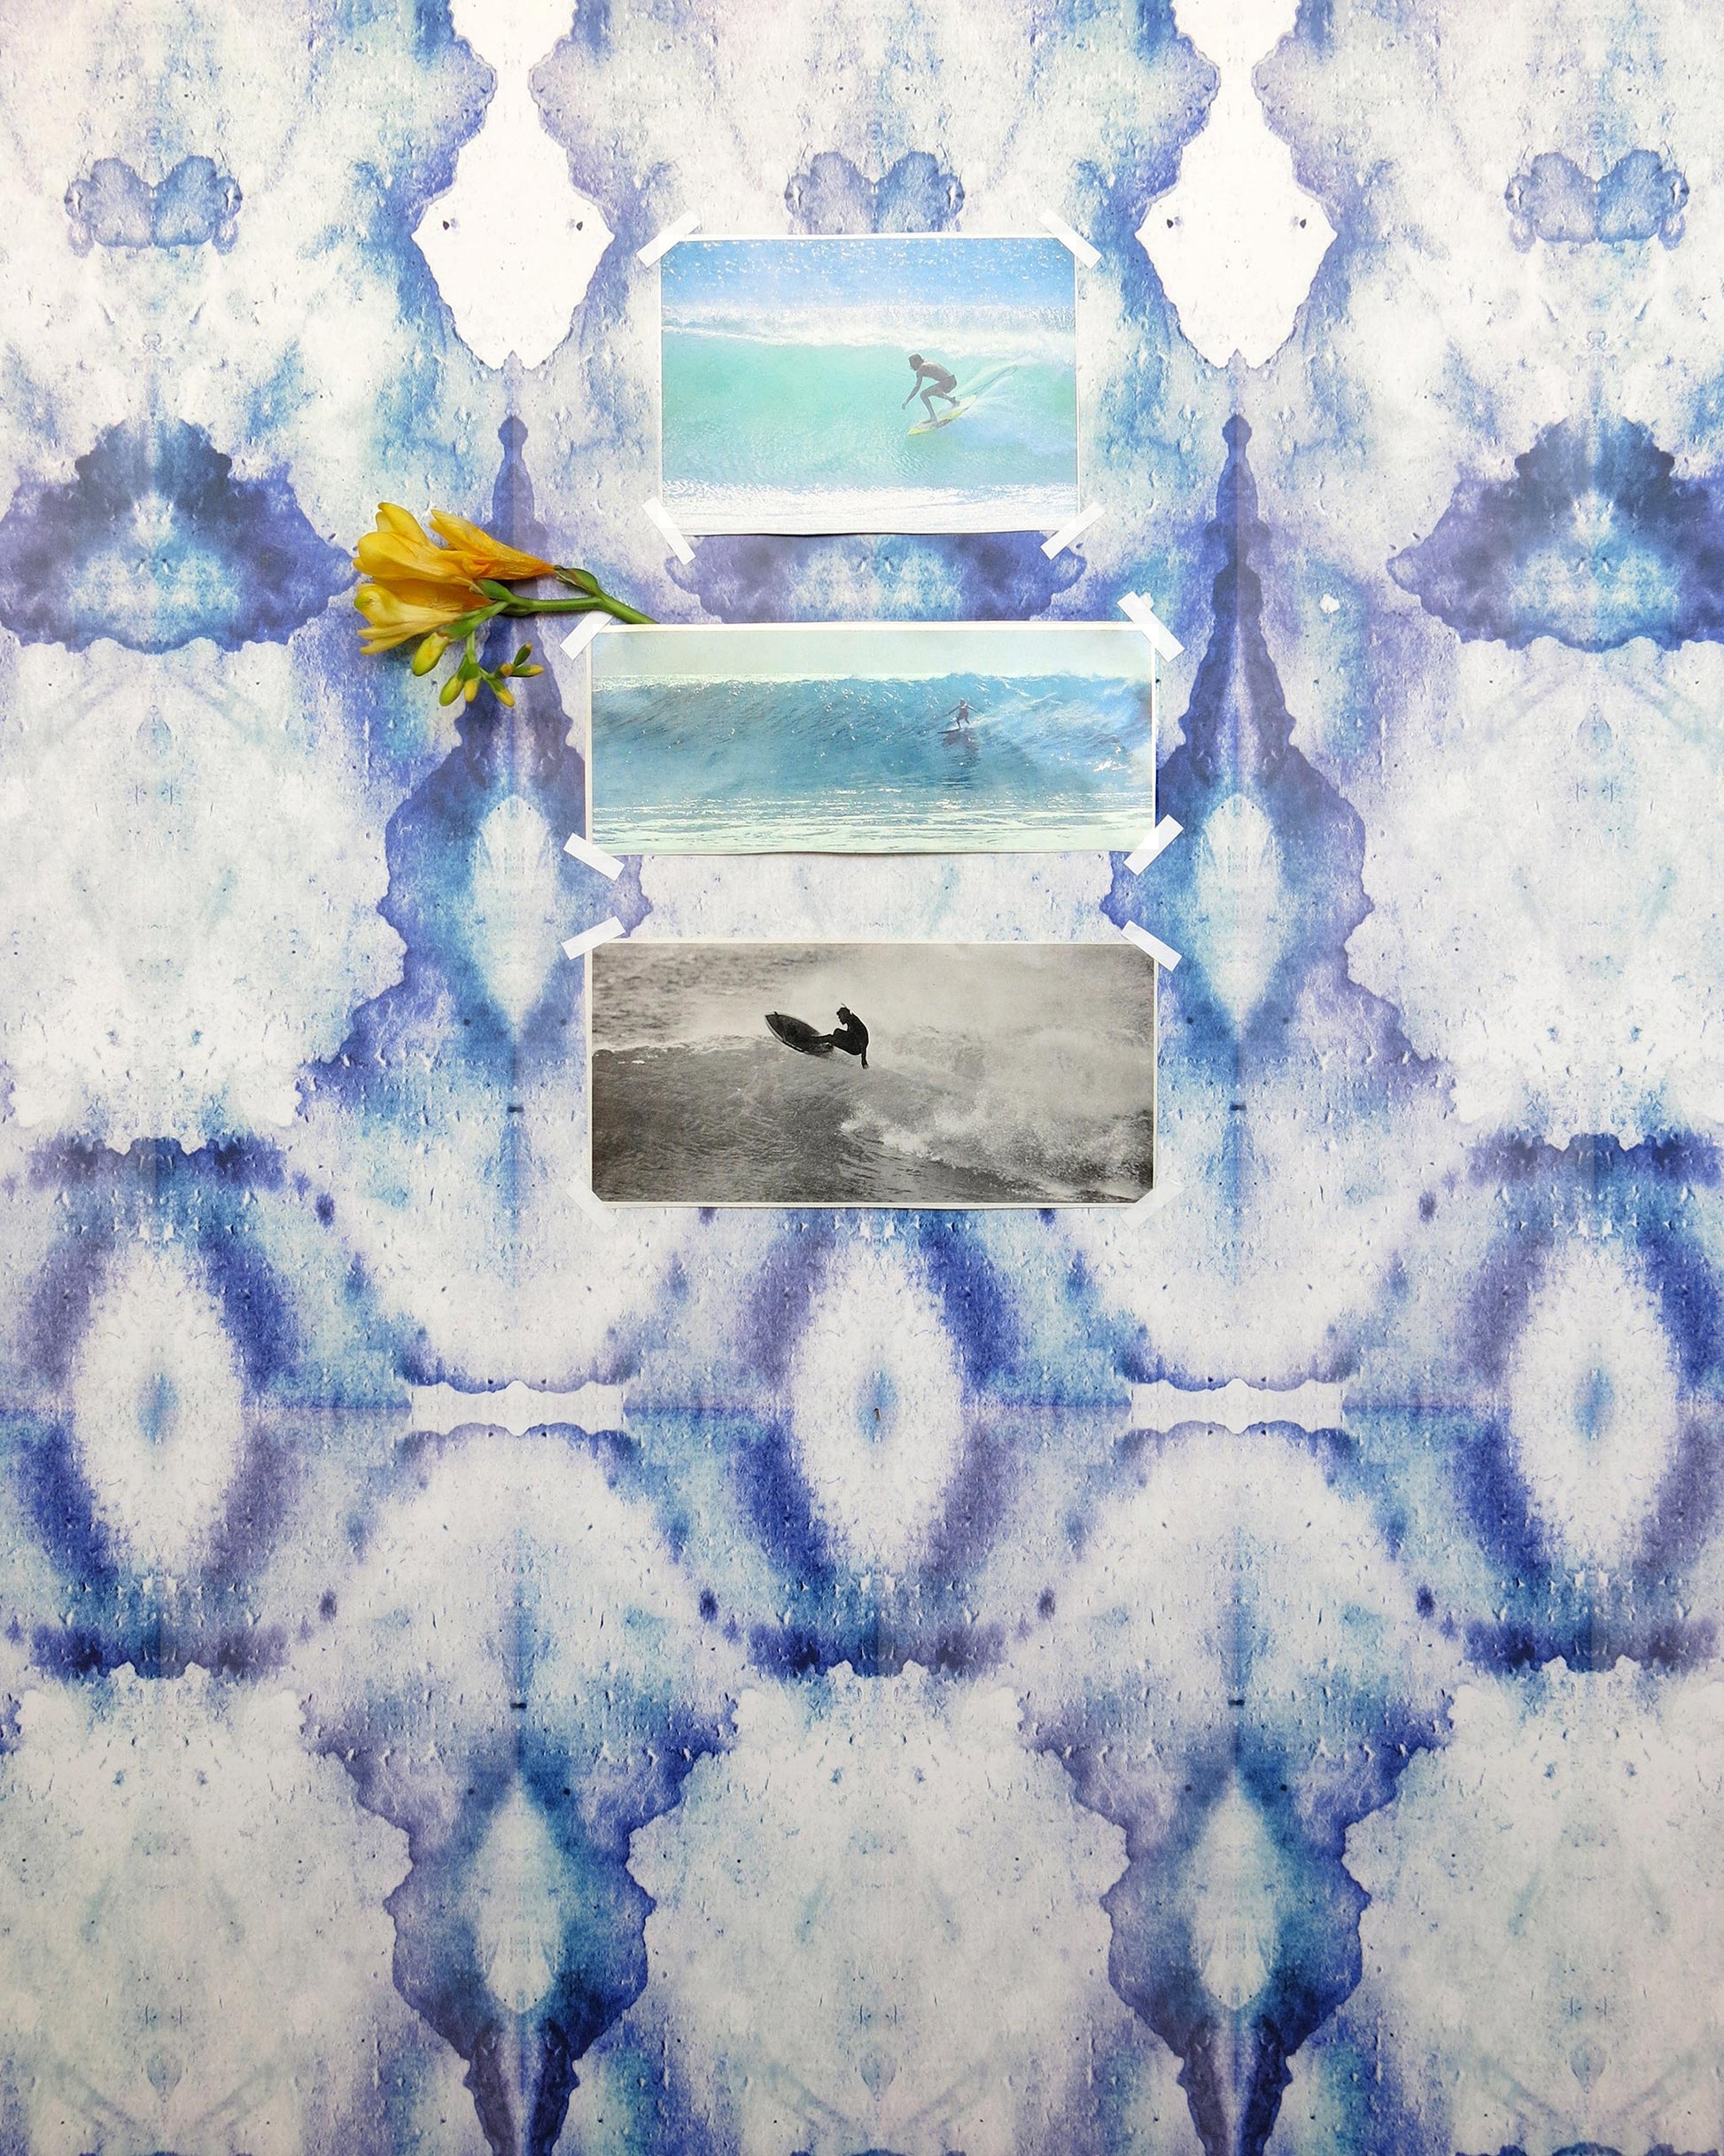 A blue and white photo of a surfboard on a wall decorated with luxury high-end Bungalow Wallpaper Royal watercolor designs